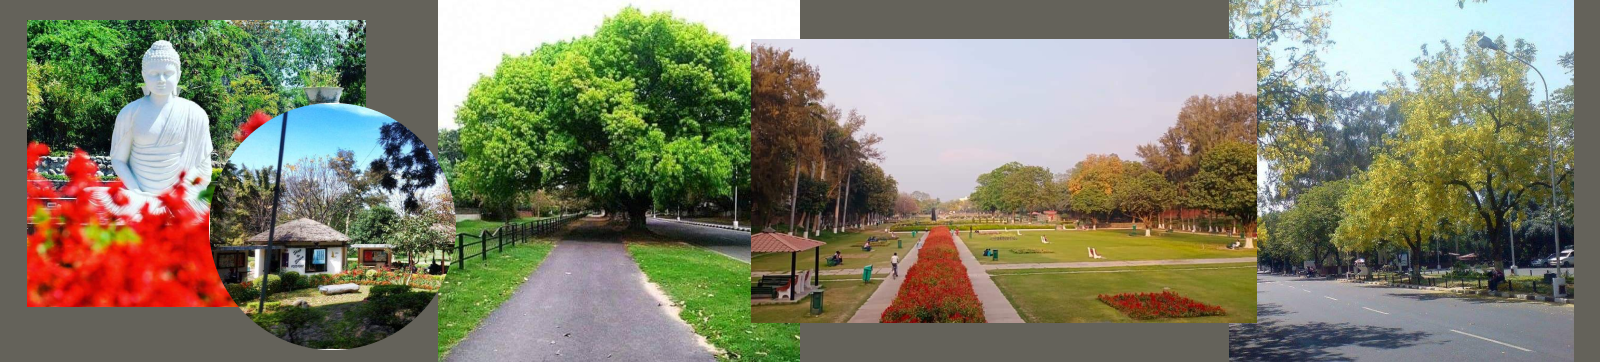 Chandigarh in Spring: A Riot of Unmatched Purity of Colours